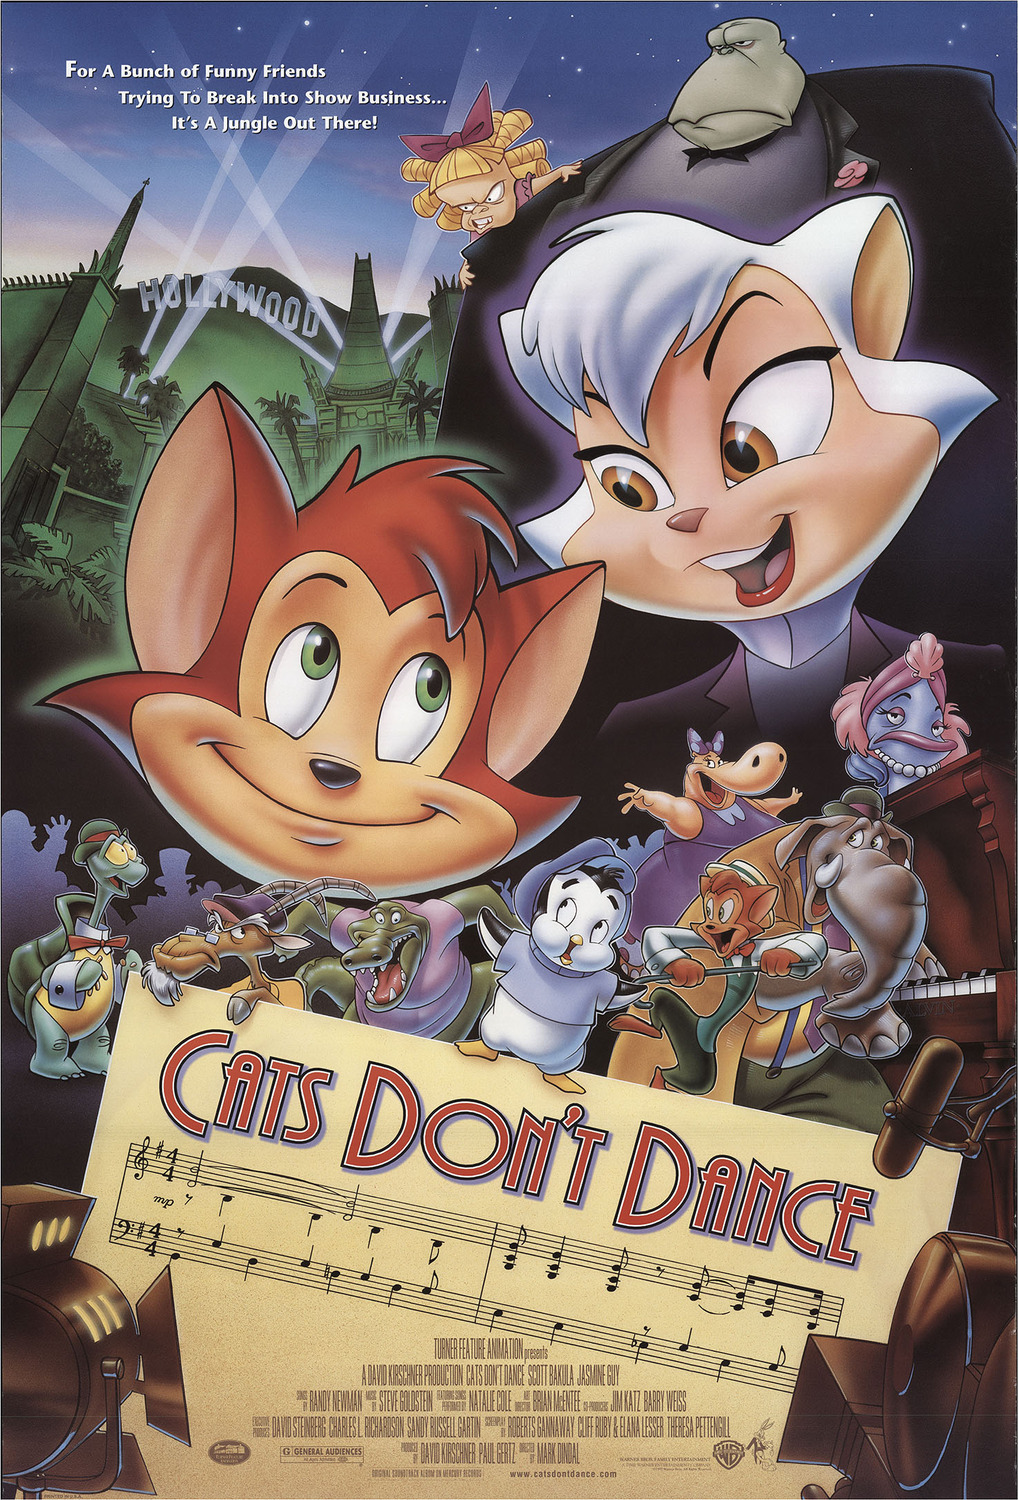 Extra Large Movie Poster Image for Cats Don't Dance 